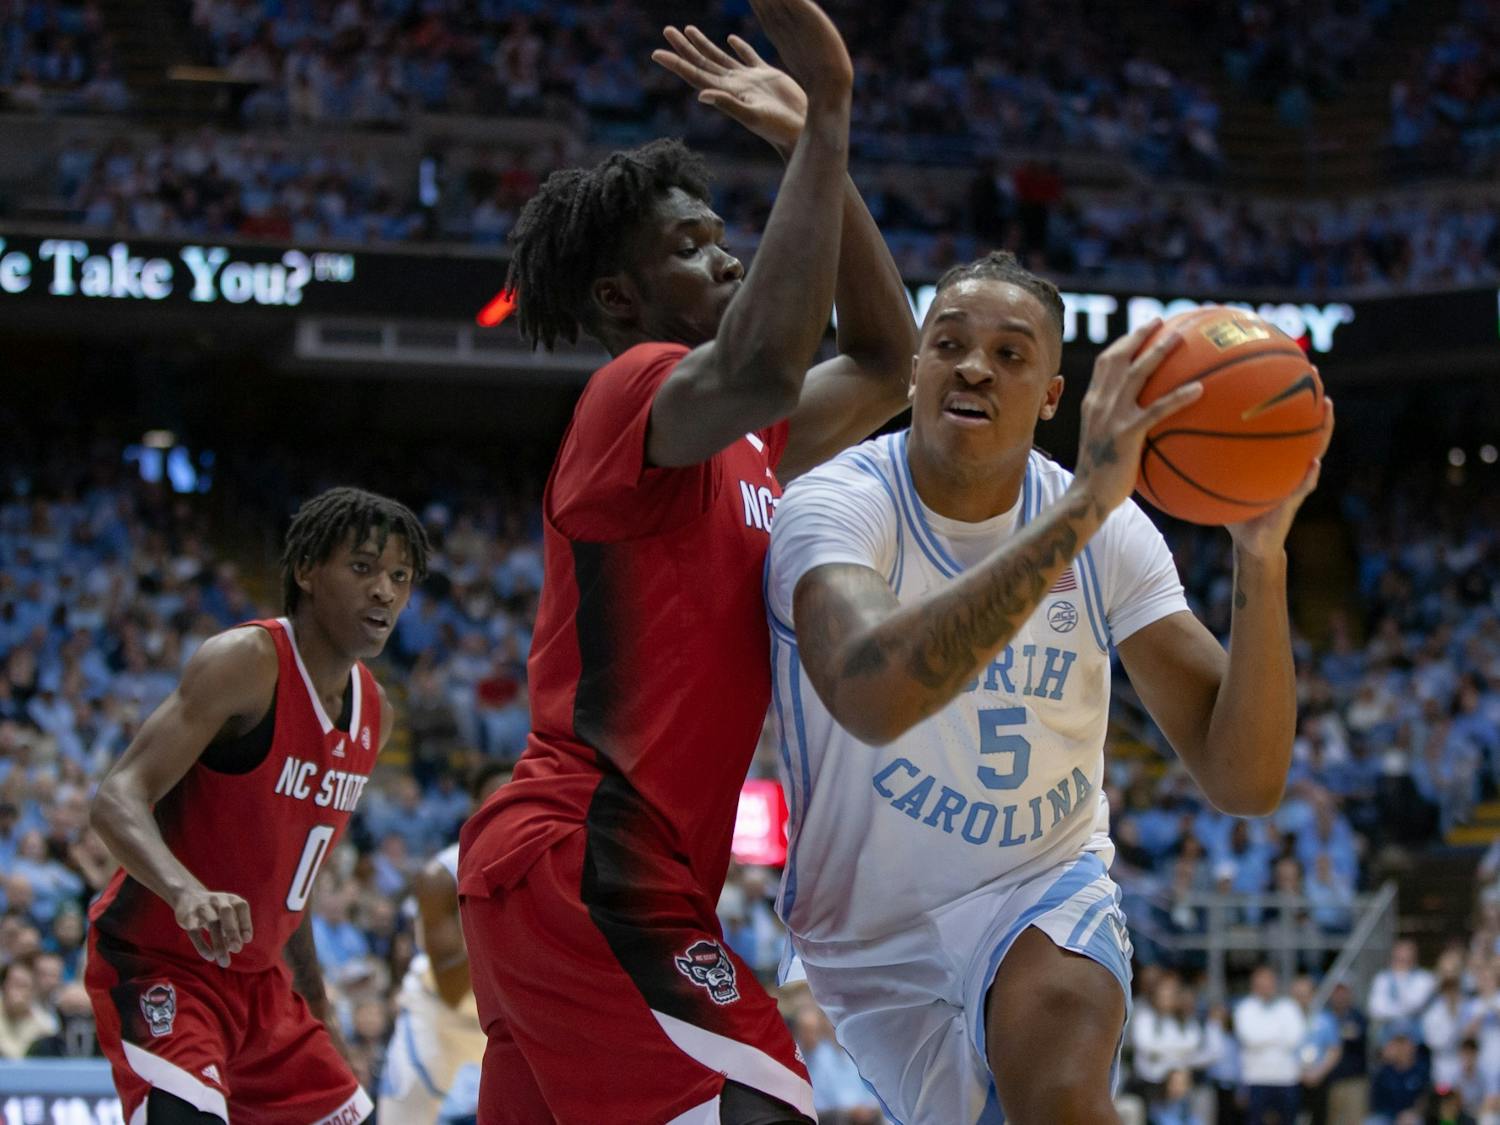 UNC senior forward/center Armando Bacot (5) passes the ball in the Dean Smith Center on Jan. 21, 2023, against the N.C. State Wolfpack. UNC won 80-69.